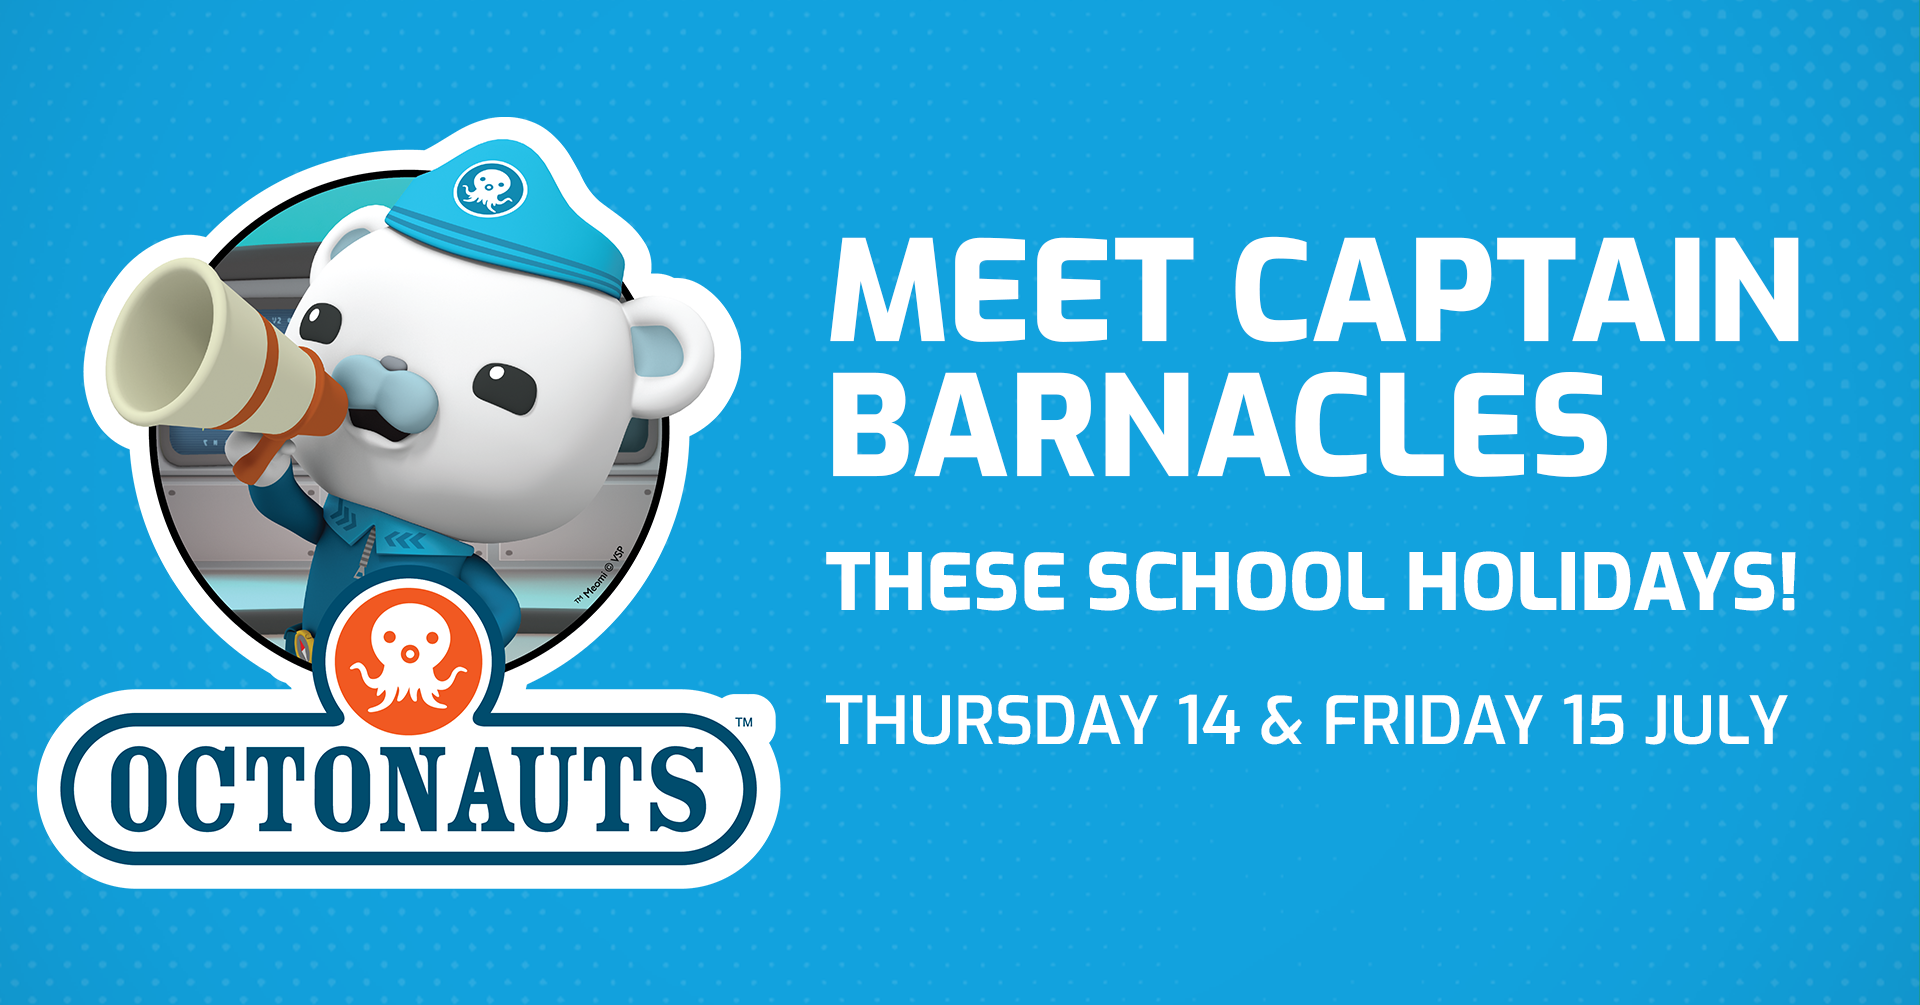 Come and meet Captain Barnacles